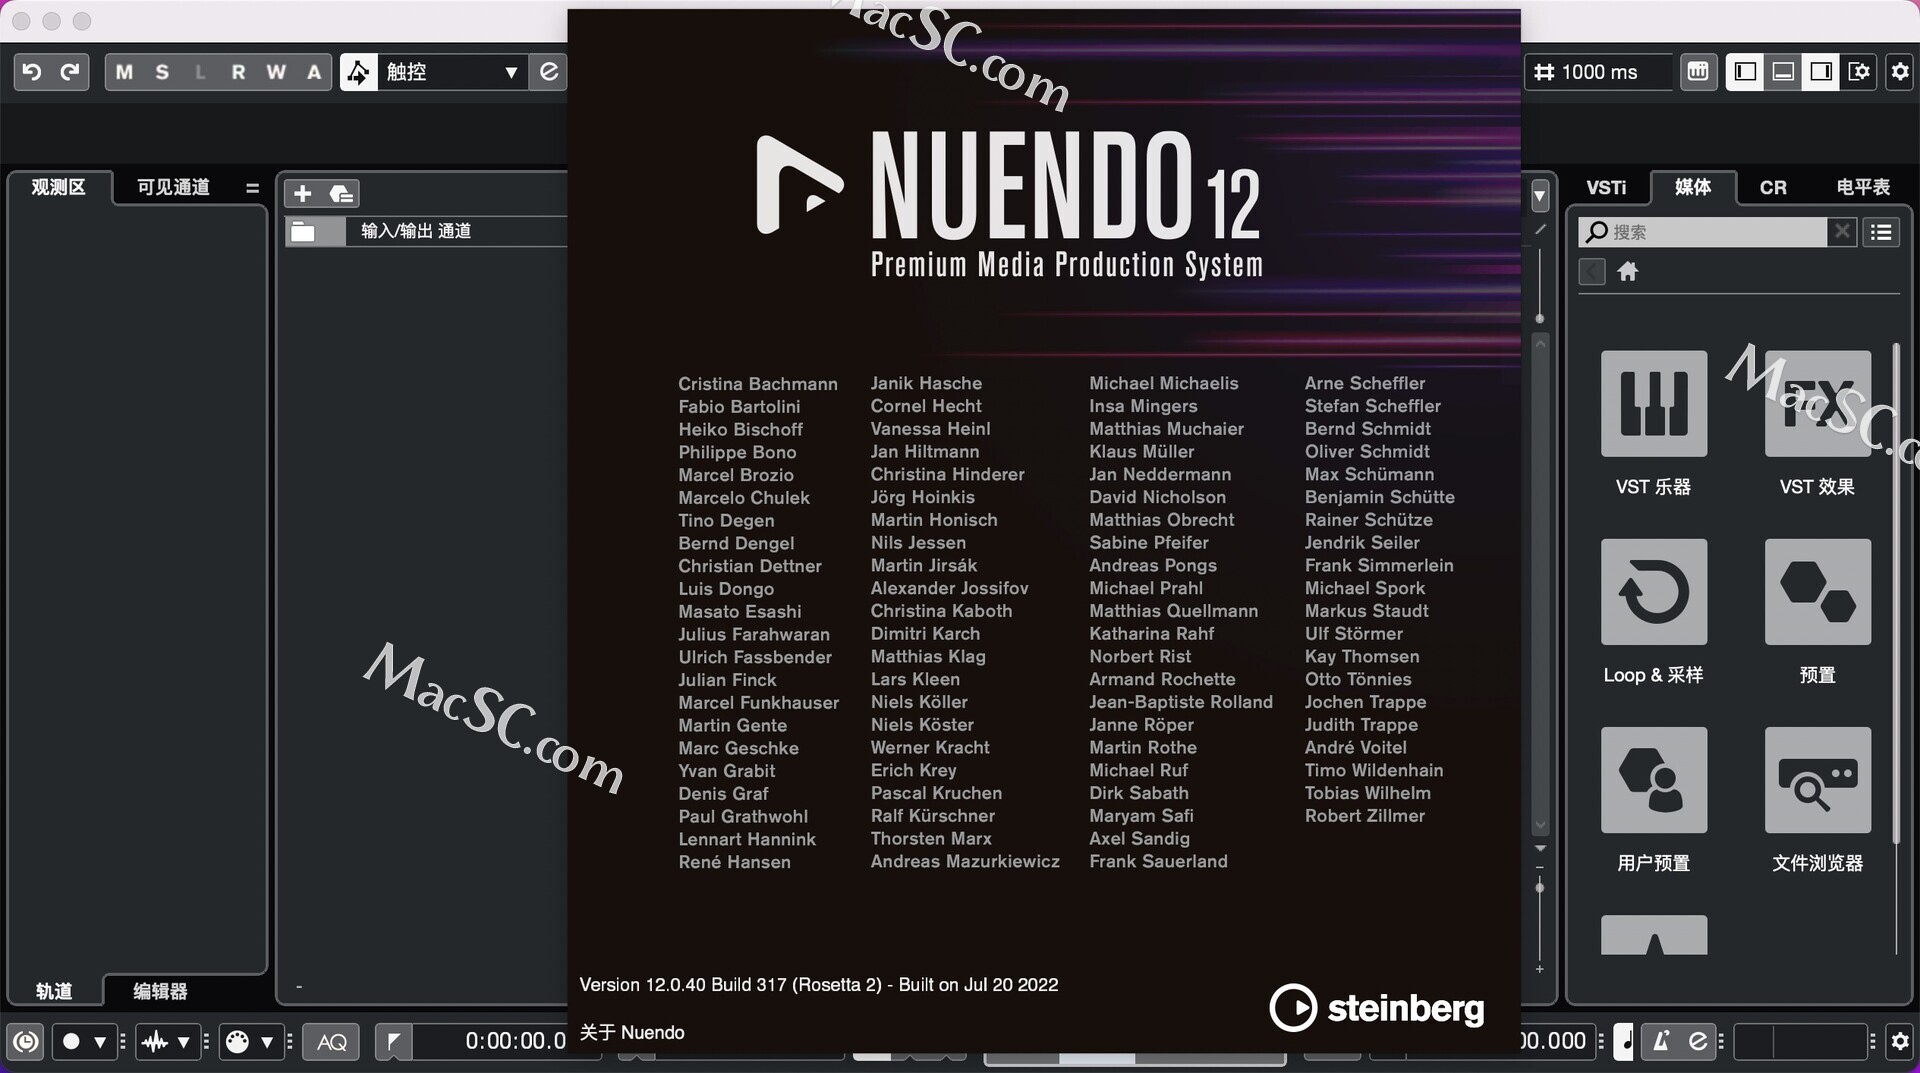 download the last version for apple Steinberg Nuendo 12.0.70